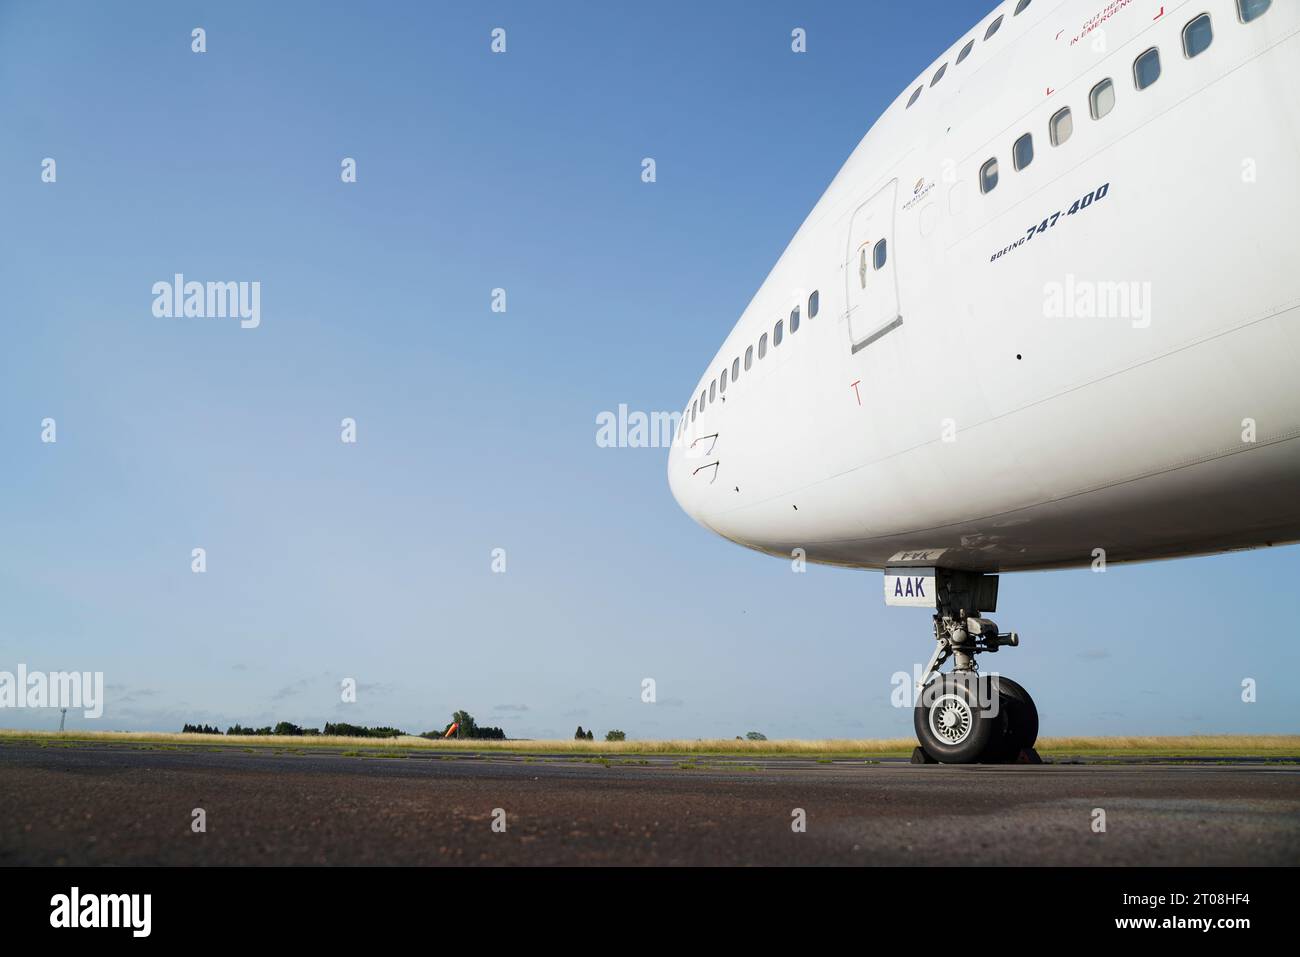 A Boeing 747-400 jumbo jet against a blue sky on a runway in Kemble, Gloucestershire, UK Stock Photo